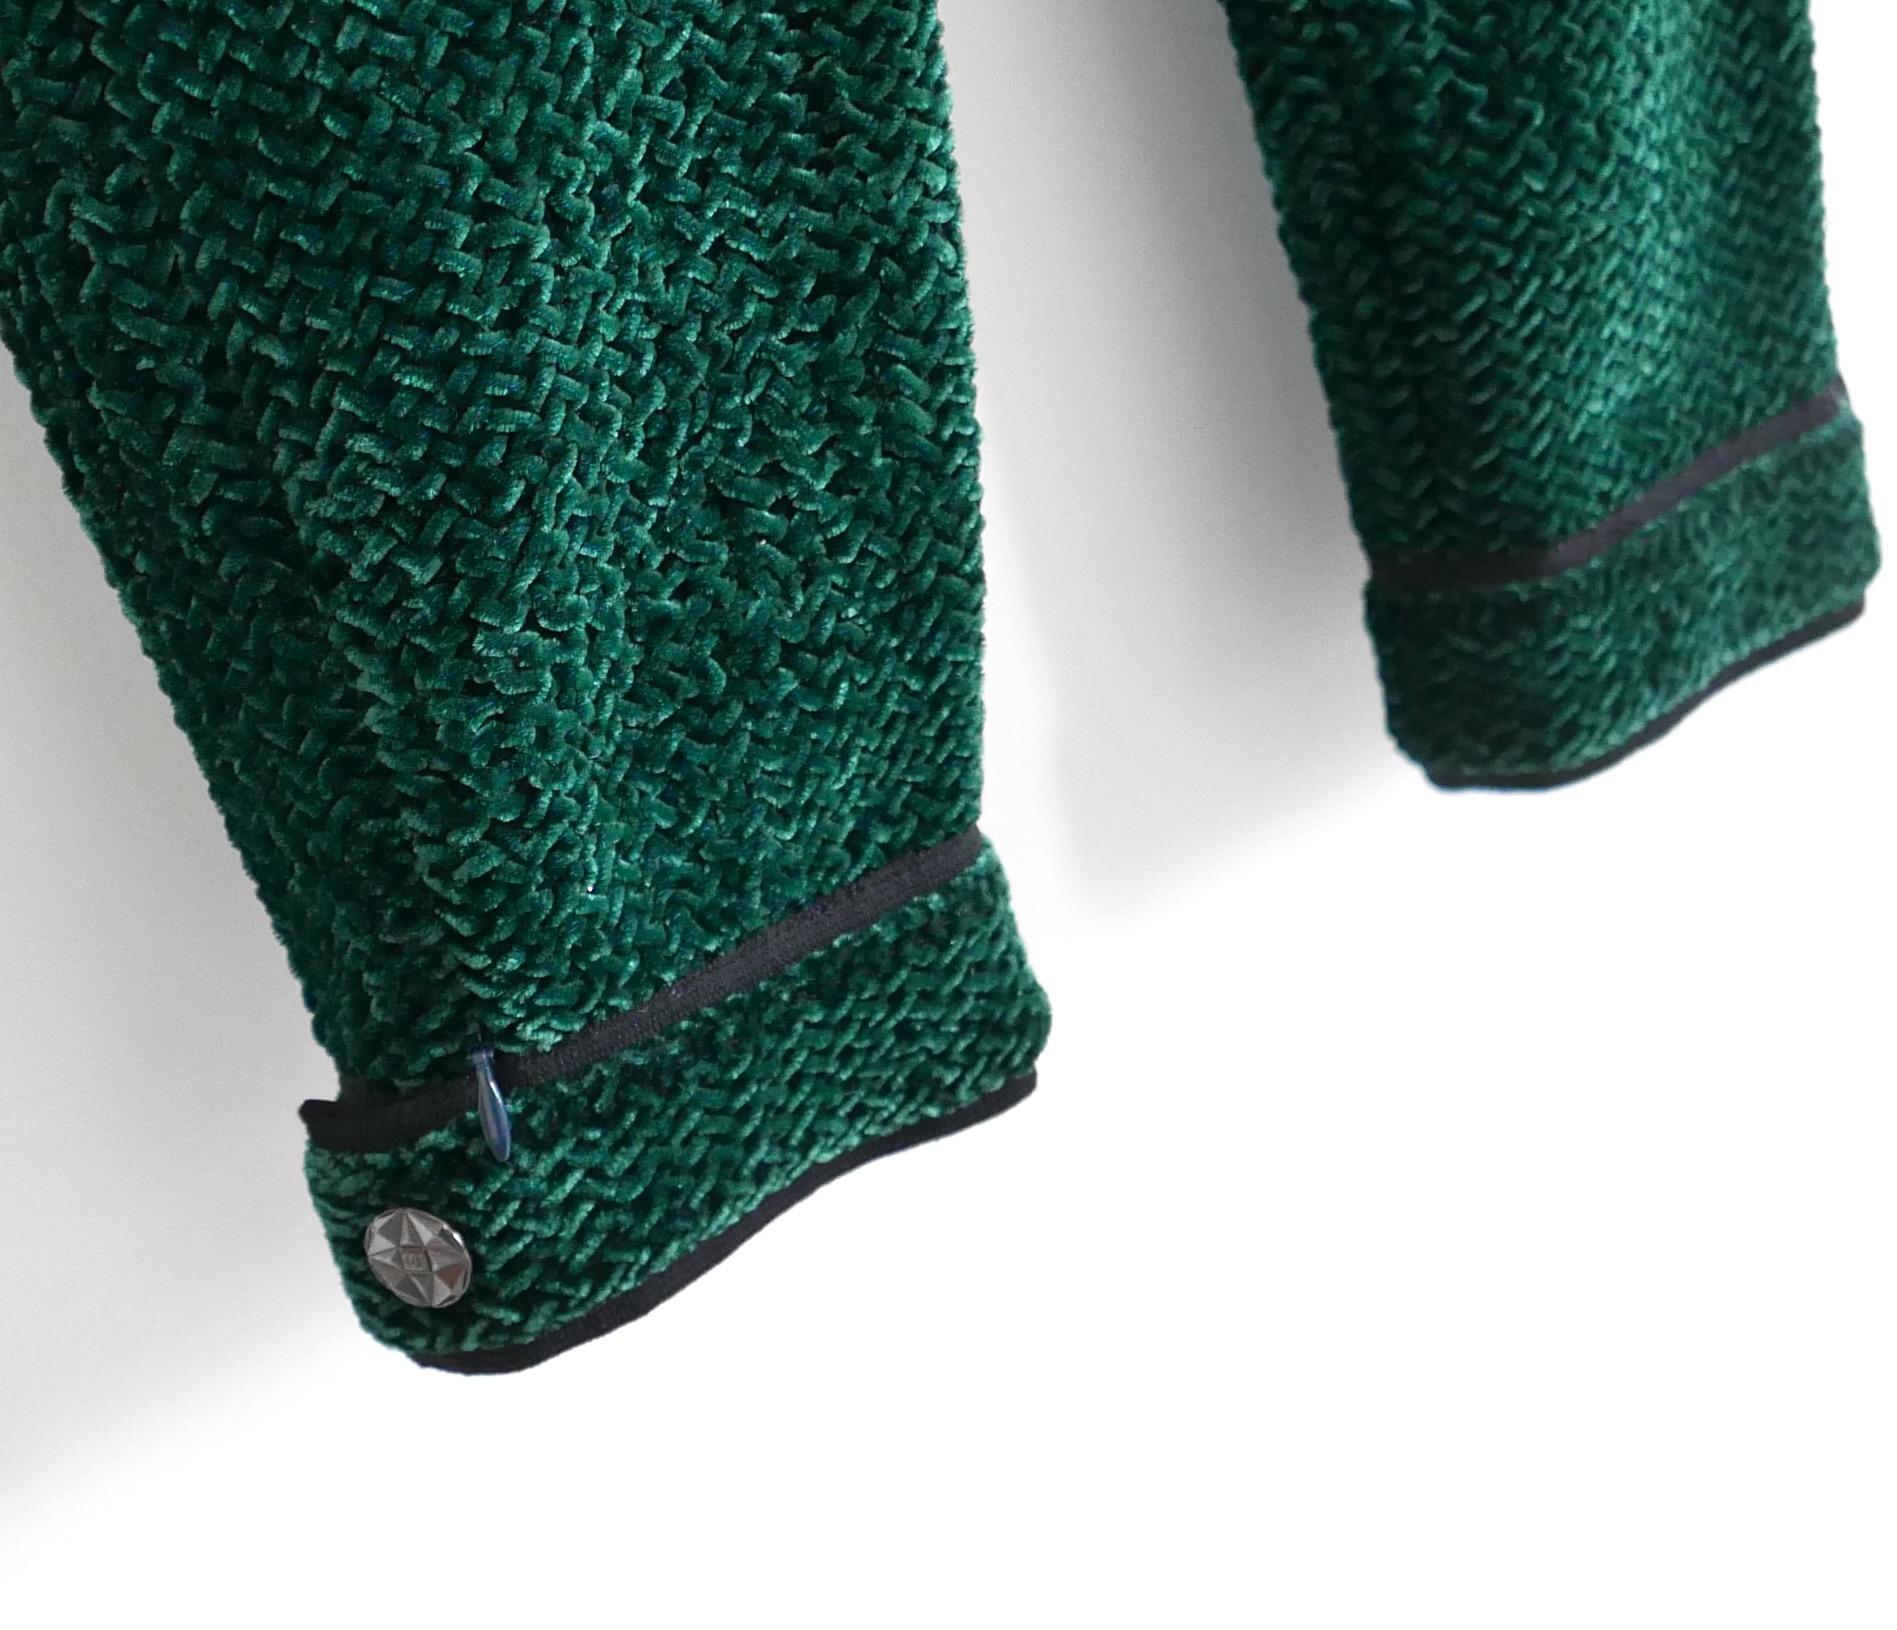 Amazing Chanel pedal pusher trousers from the Fall 2012 collection. look 17 on the runway. Unworn with spare fabric swatch included. 
Made from superbly textured emerald green viscose/silk mix stretch velvet with black satin piping. 
They have a